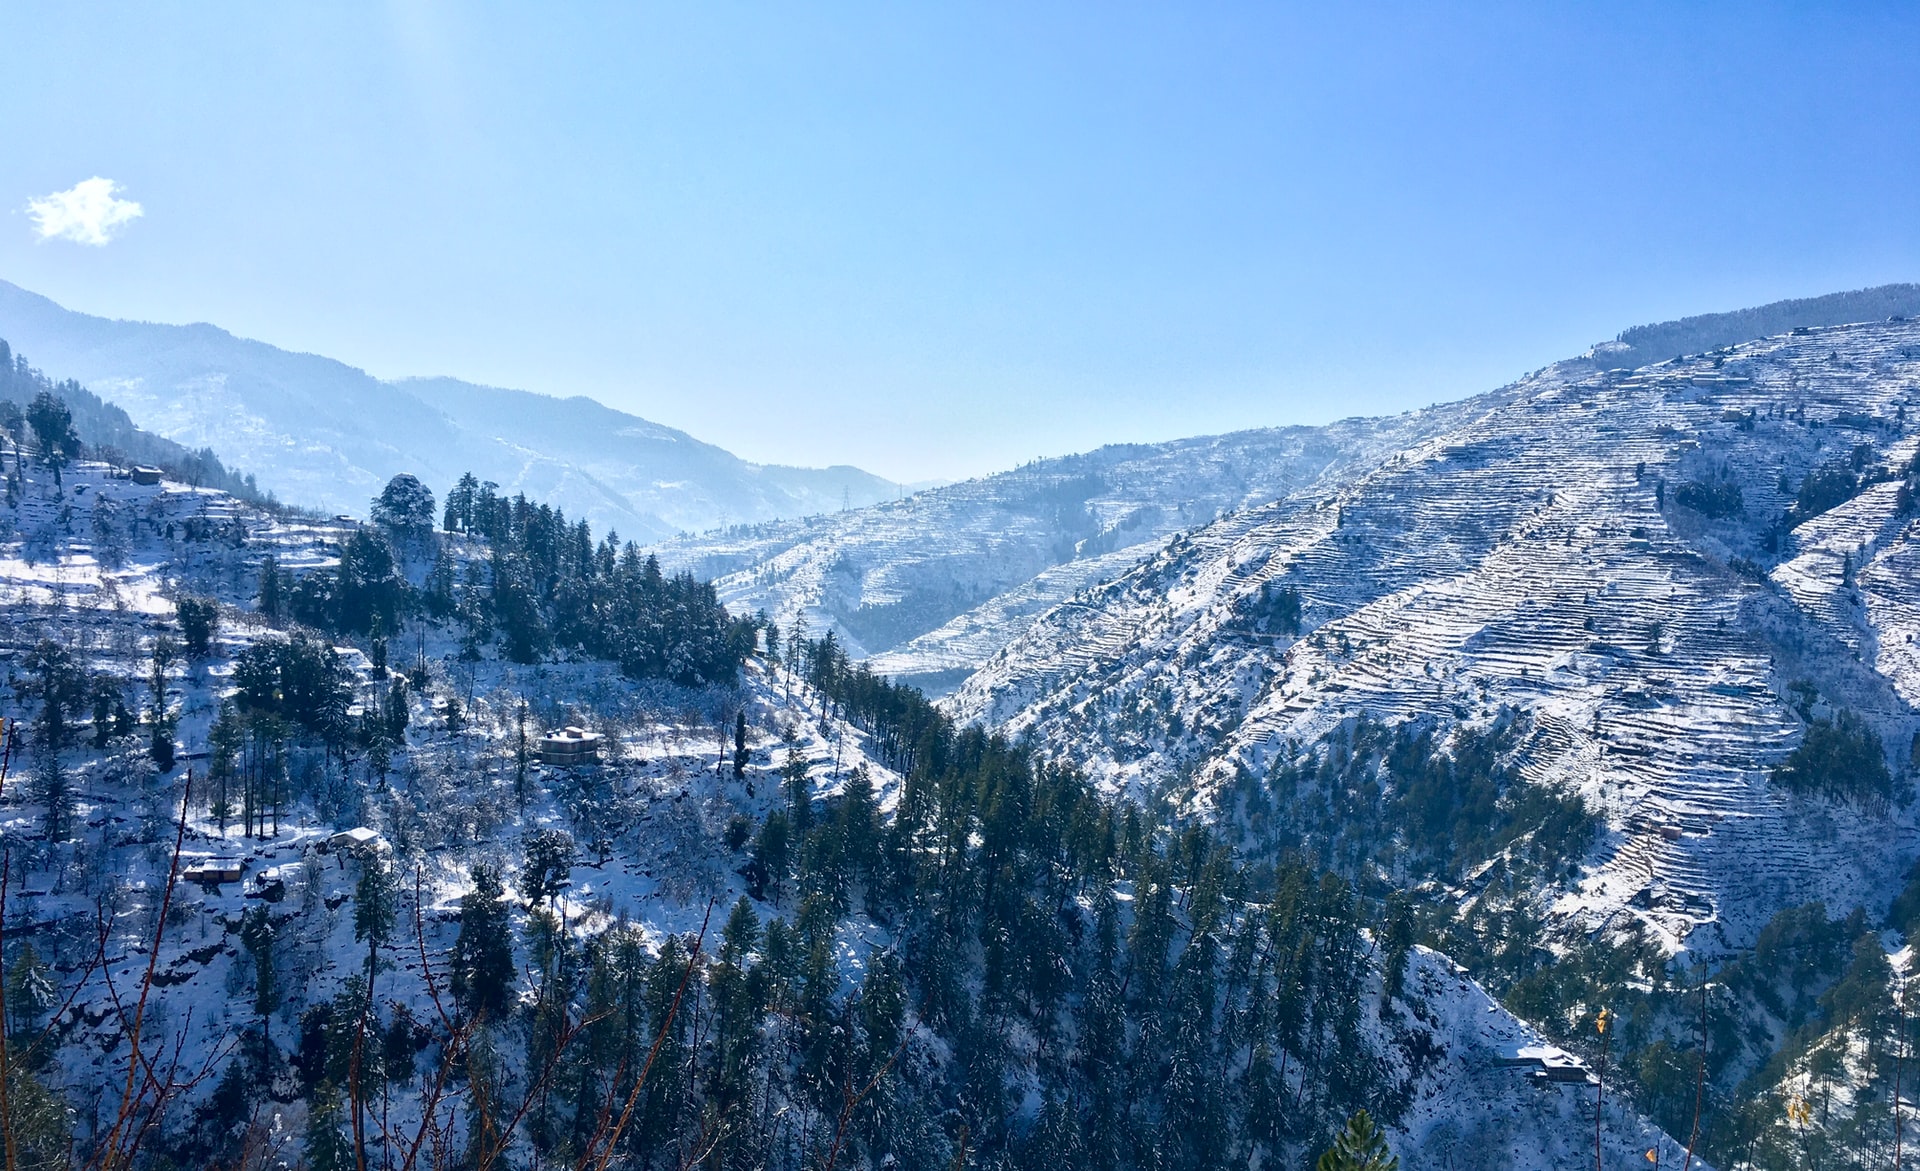 Can we visit Shimla in January? What kind of clothes are needed? - Quora